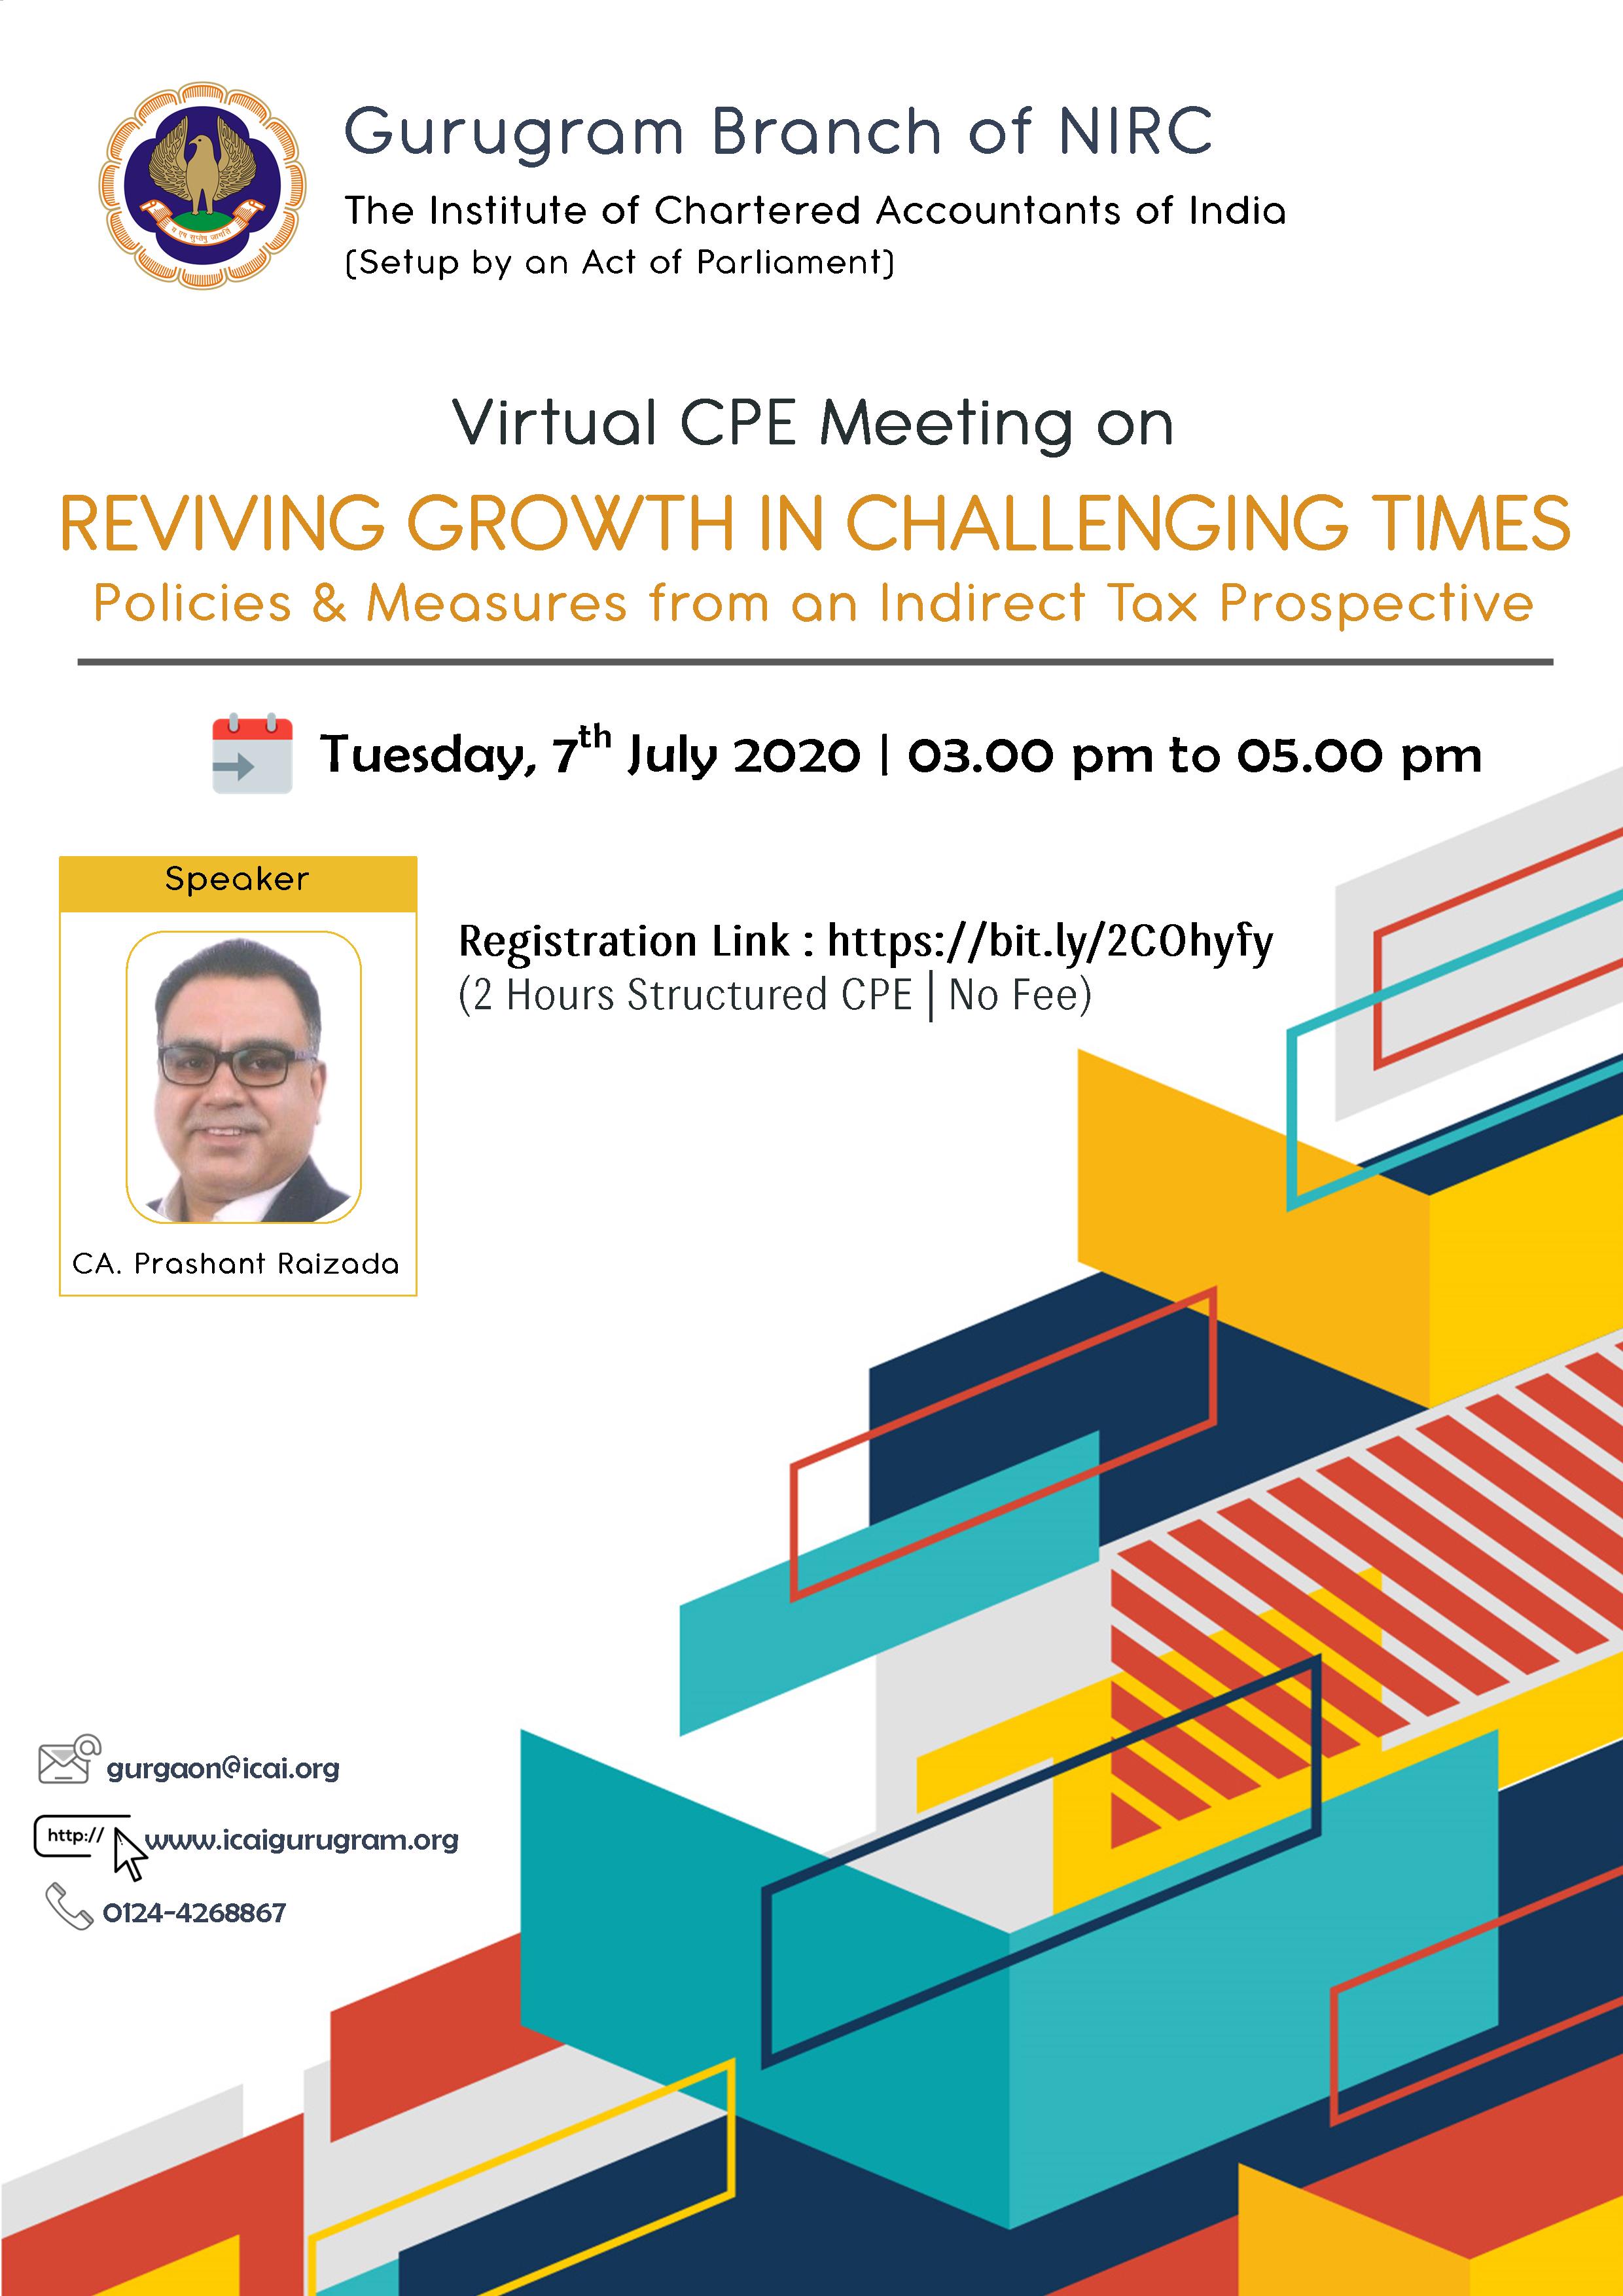 Virtual CPE Meeting on REVIVING GROWTH IN CHALLENGING TIMES